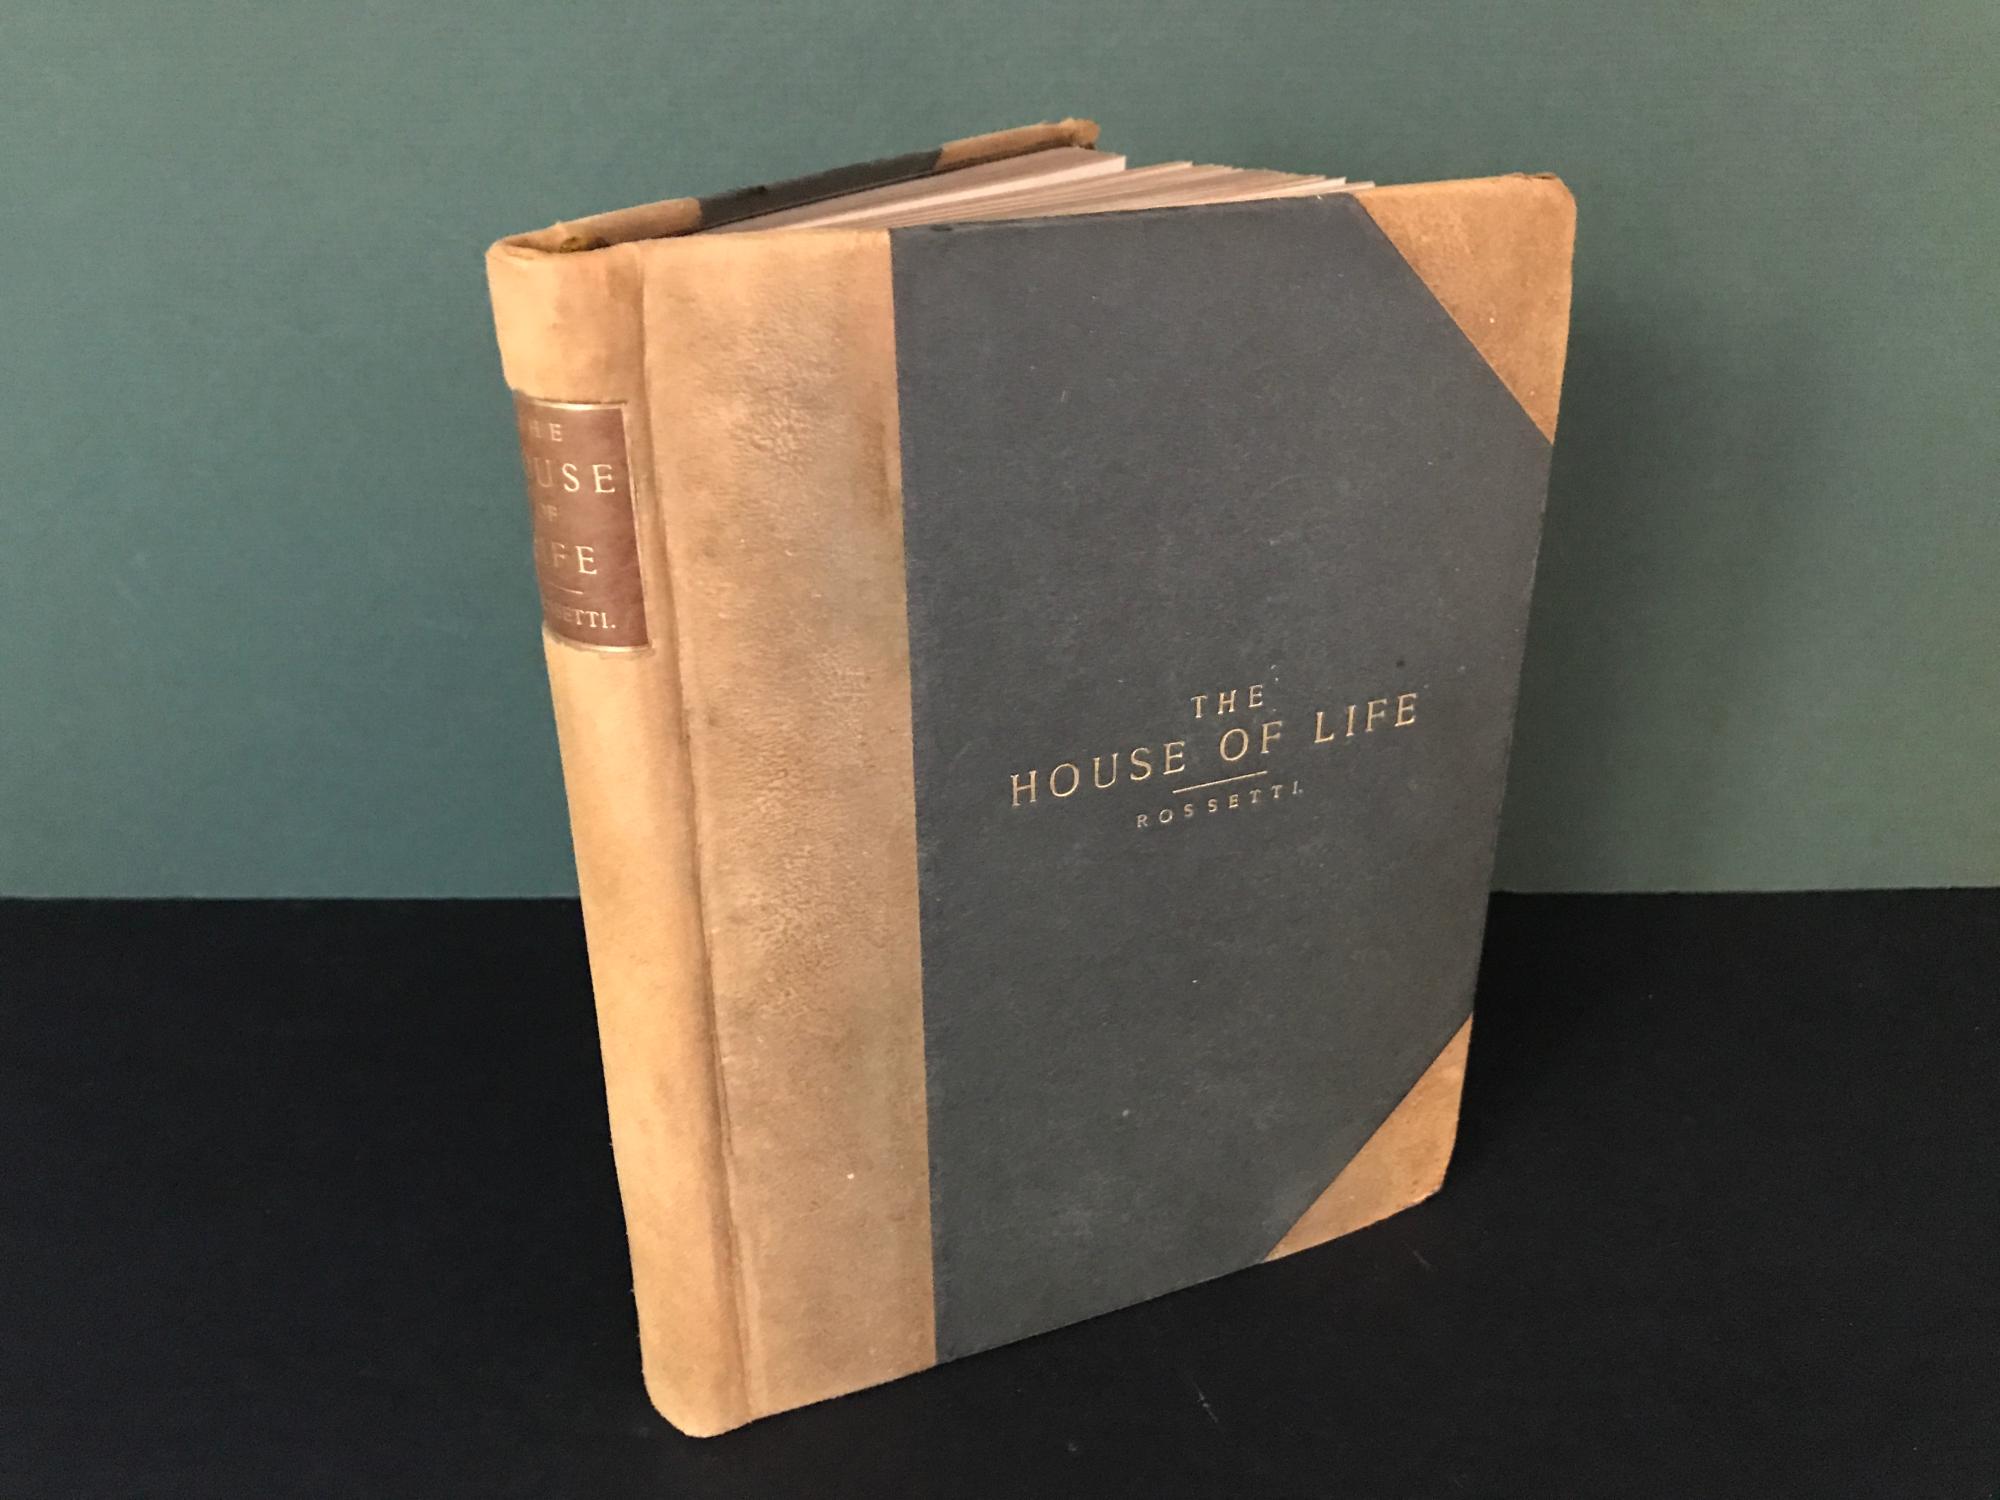 The House of Life: Being a Collection of Sonnets by Dante Gabriel Rossetti  [Signed] by Rossetti, Dante Gabriel (Signed by Elbert Hubbard & Ida  Metcalf): Very Good Half-Leather (1899) First Edition, Signed